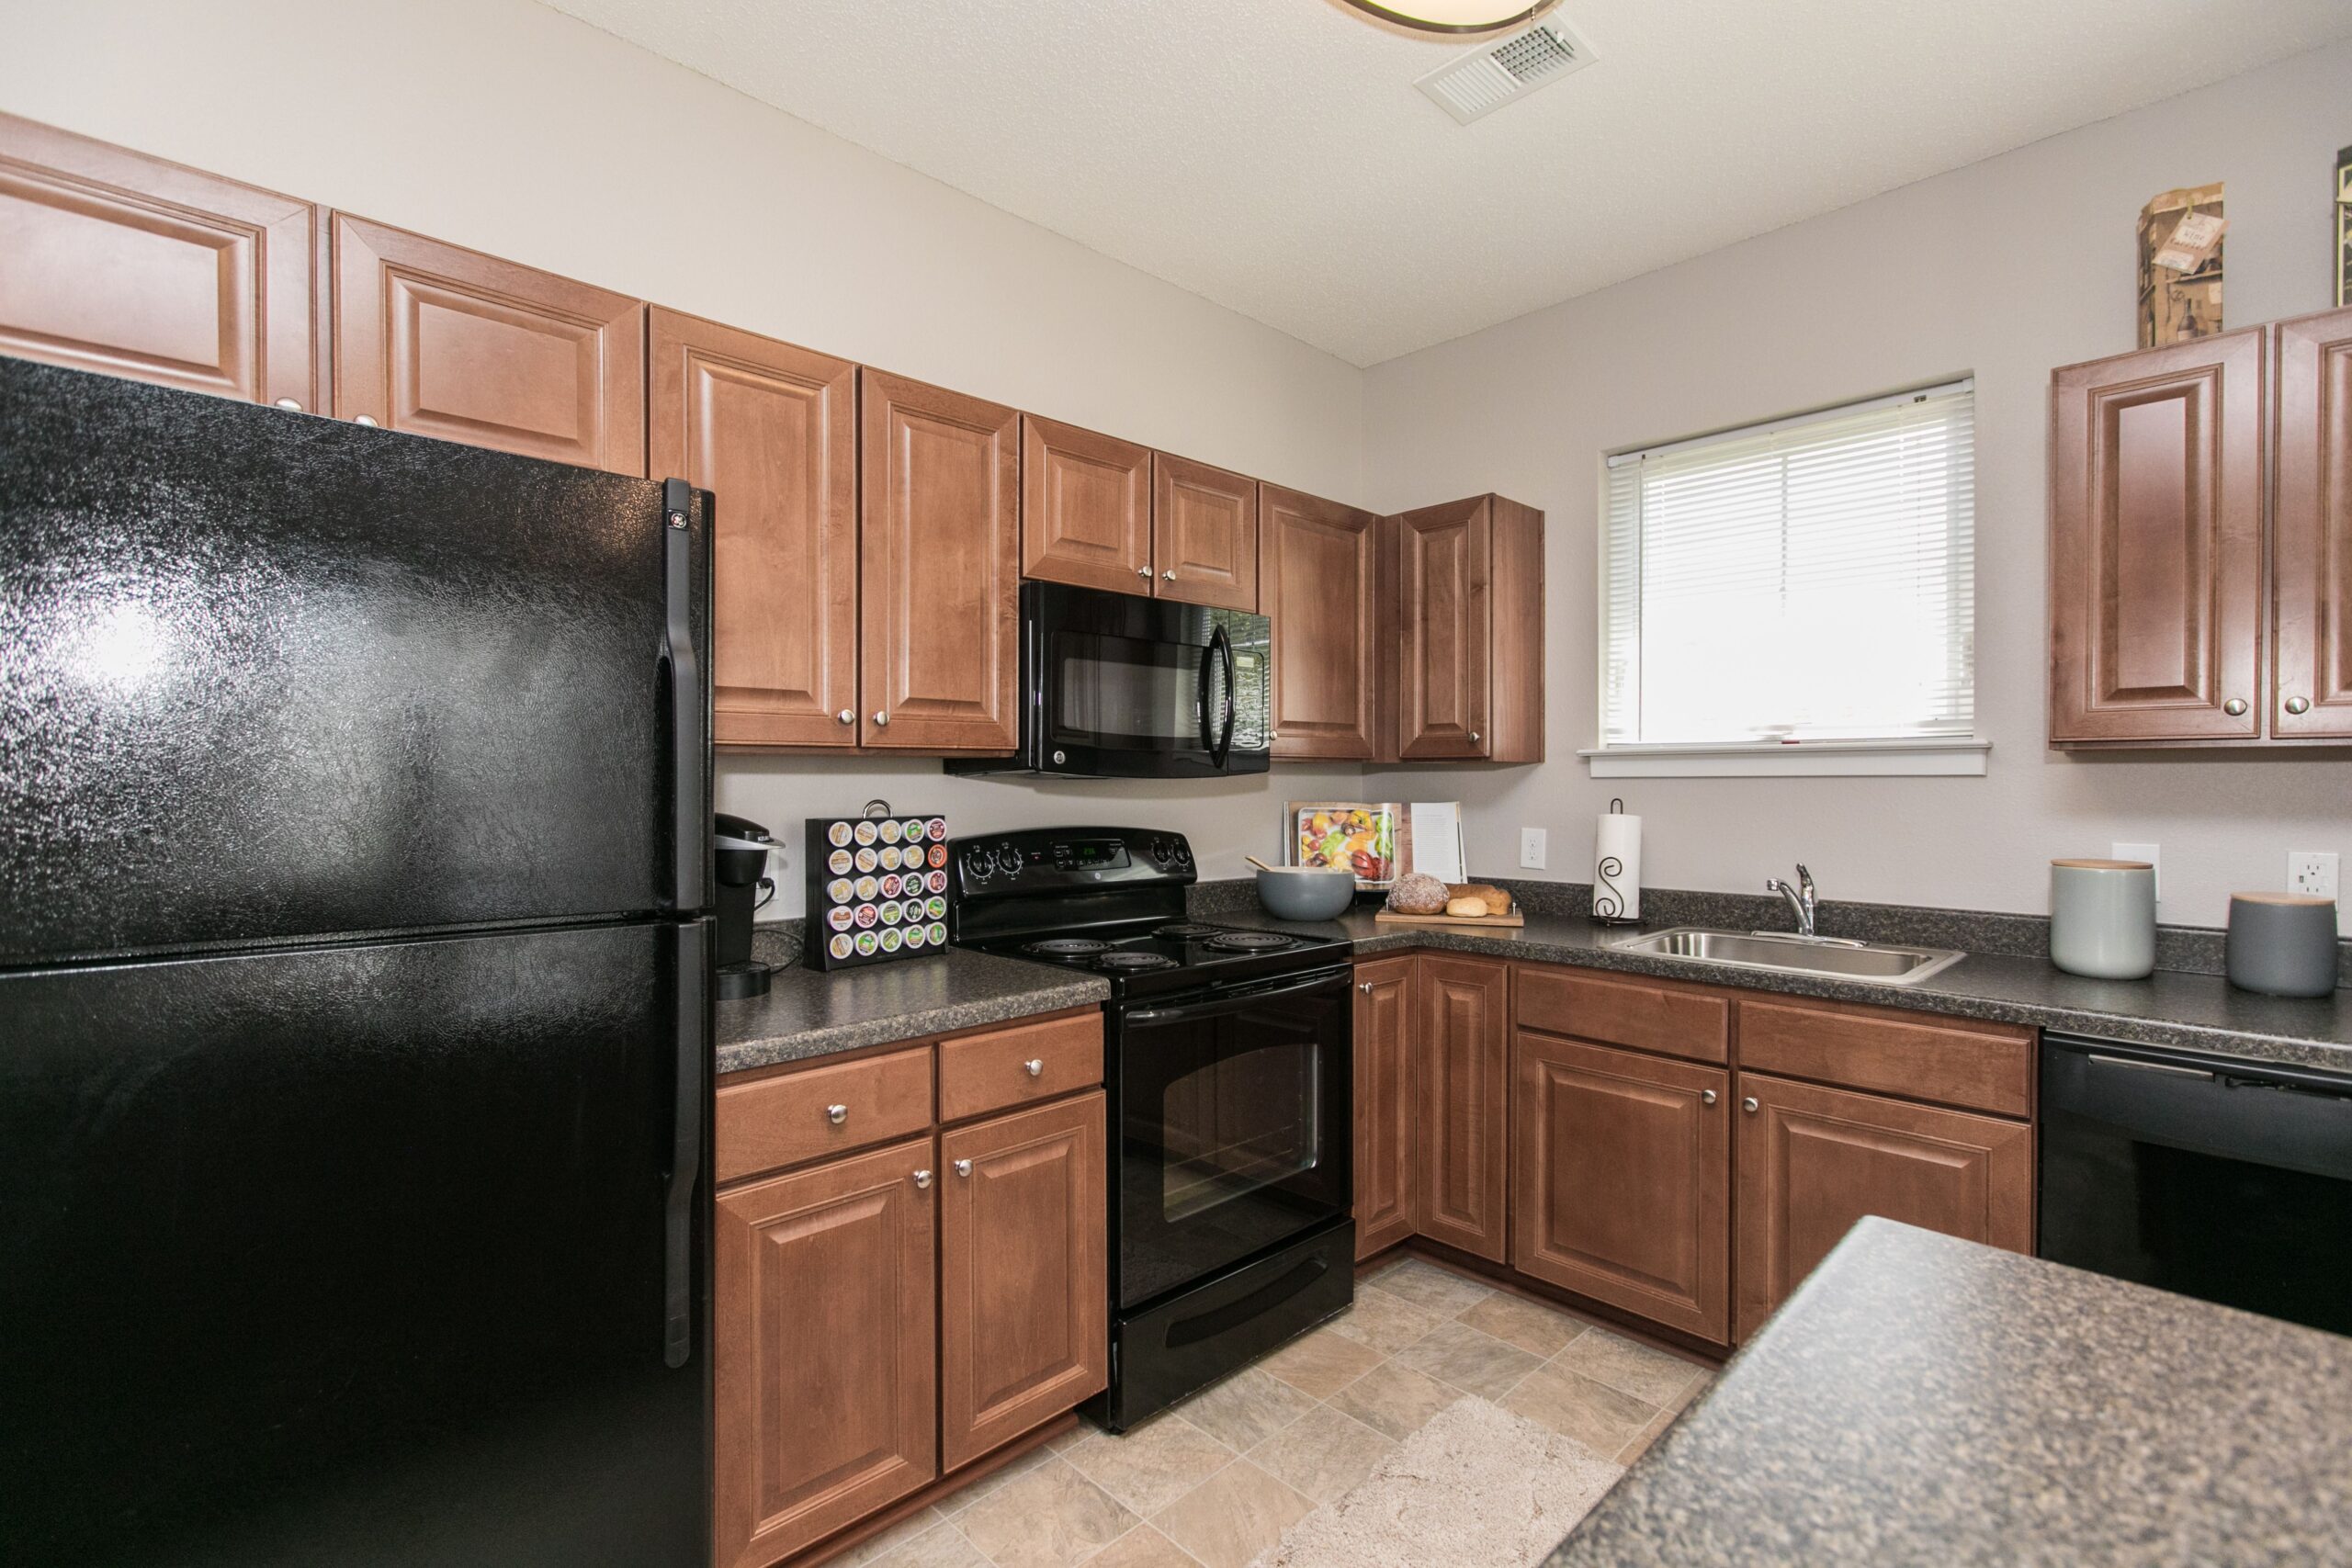 Luxury kitchen inside Charlestown Crossing apartments in MD